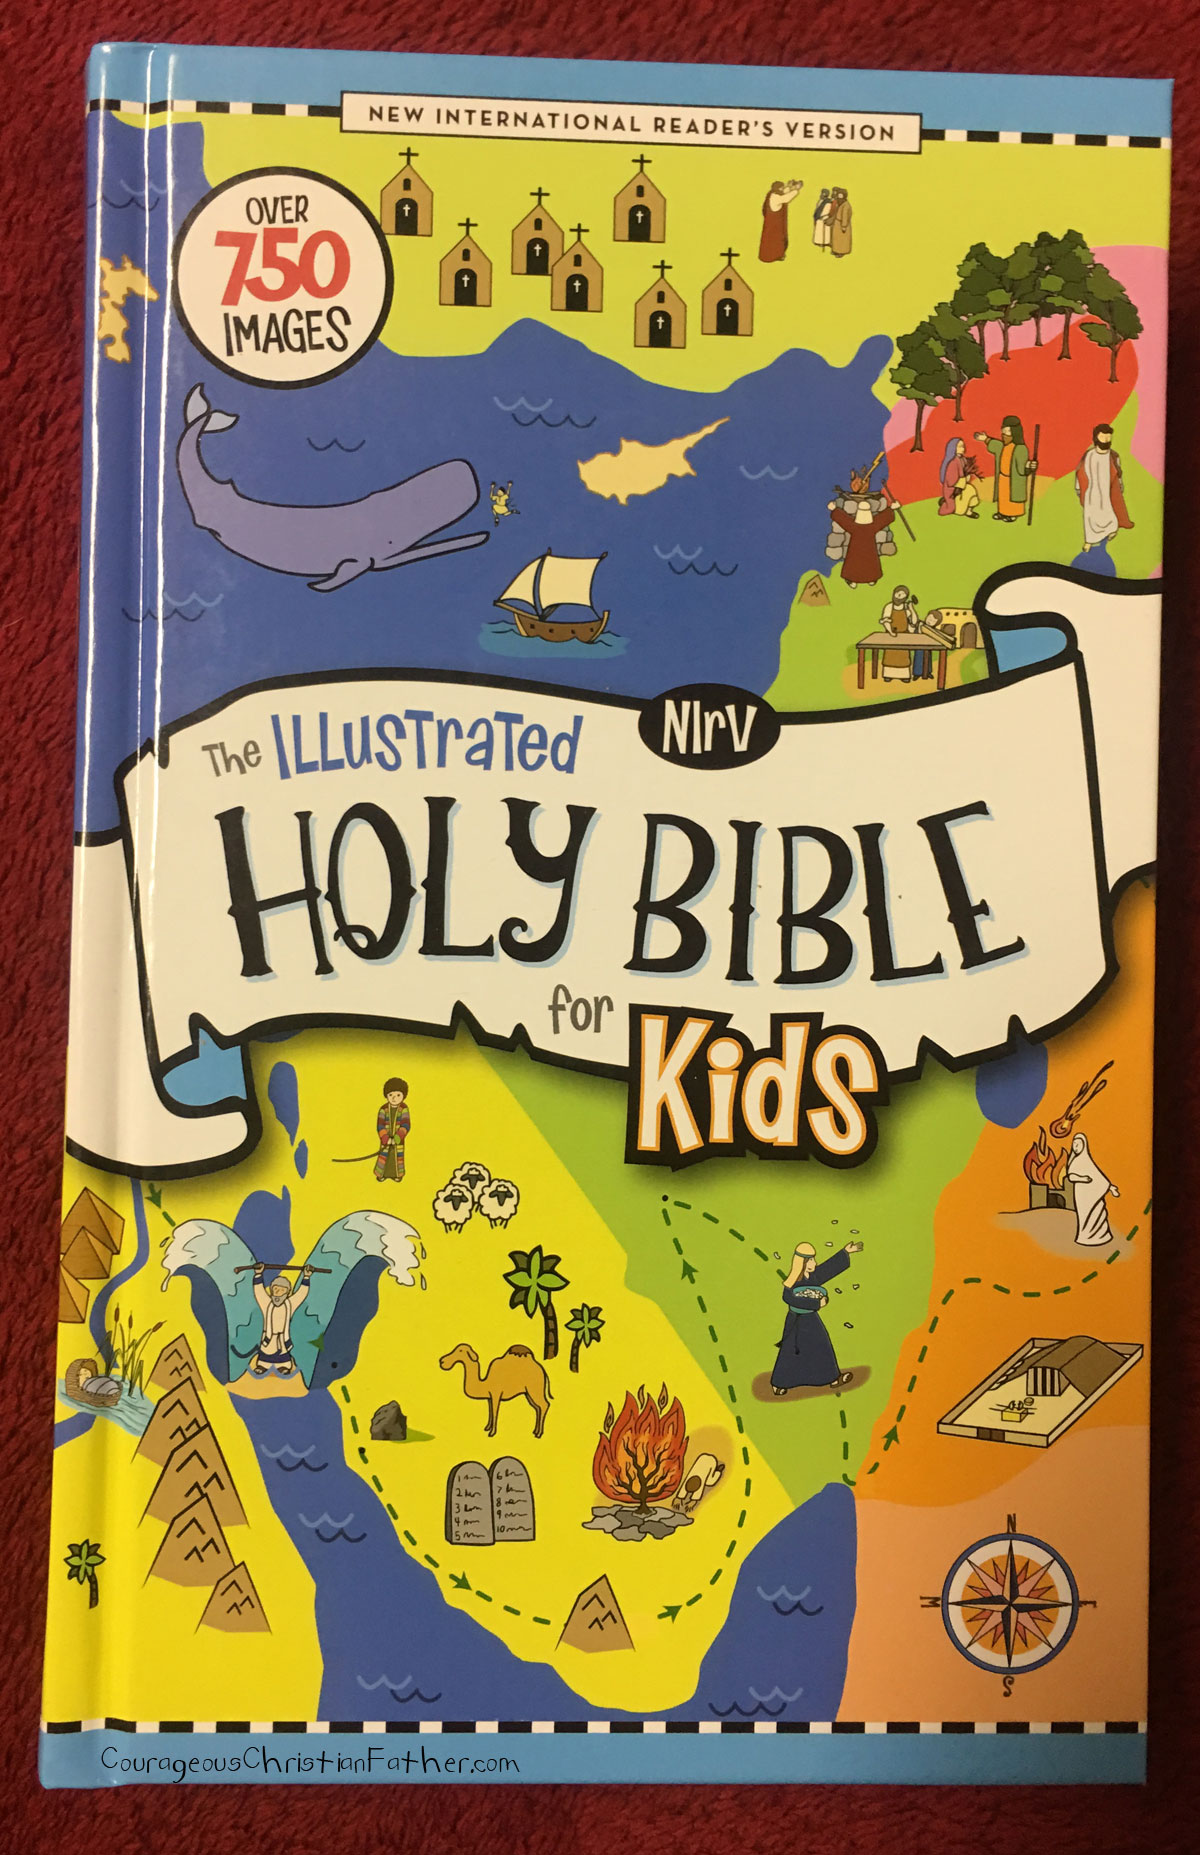 The Illustrated Holy Bible For Kids Review - This is a kids Bible that is easy to read and uses the NIrV translation. #bgbg2 #BibleGatewayPartners I enjoyed the overall first appearance look. This illustrated Bible is very colorful and has kid friendly graphics. They have over 750 illustrations throughout the 1,539 pages. 